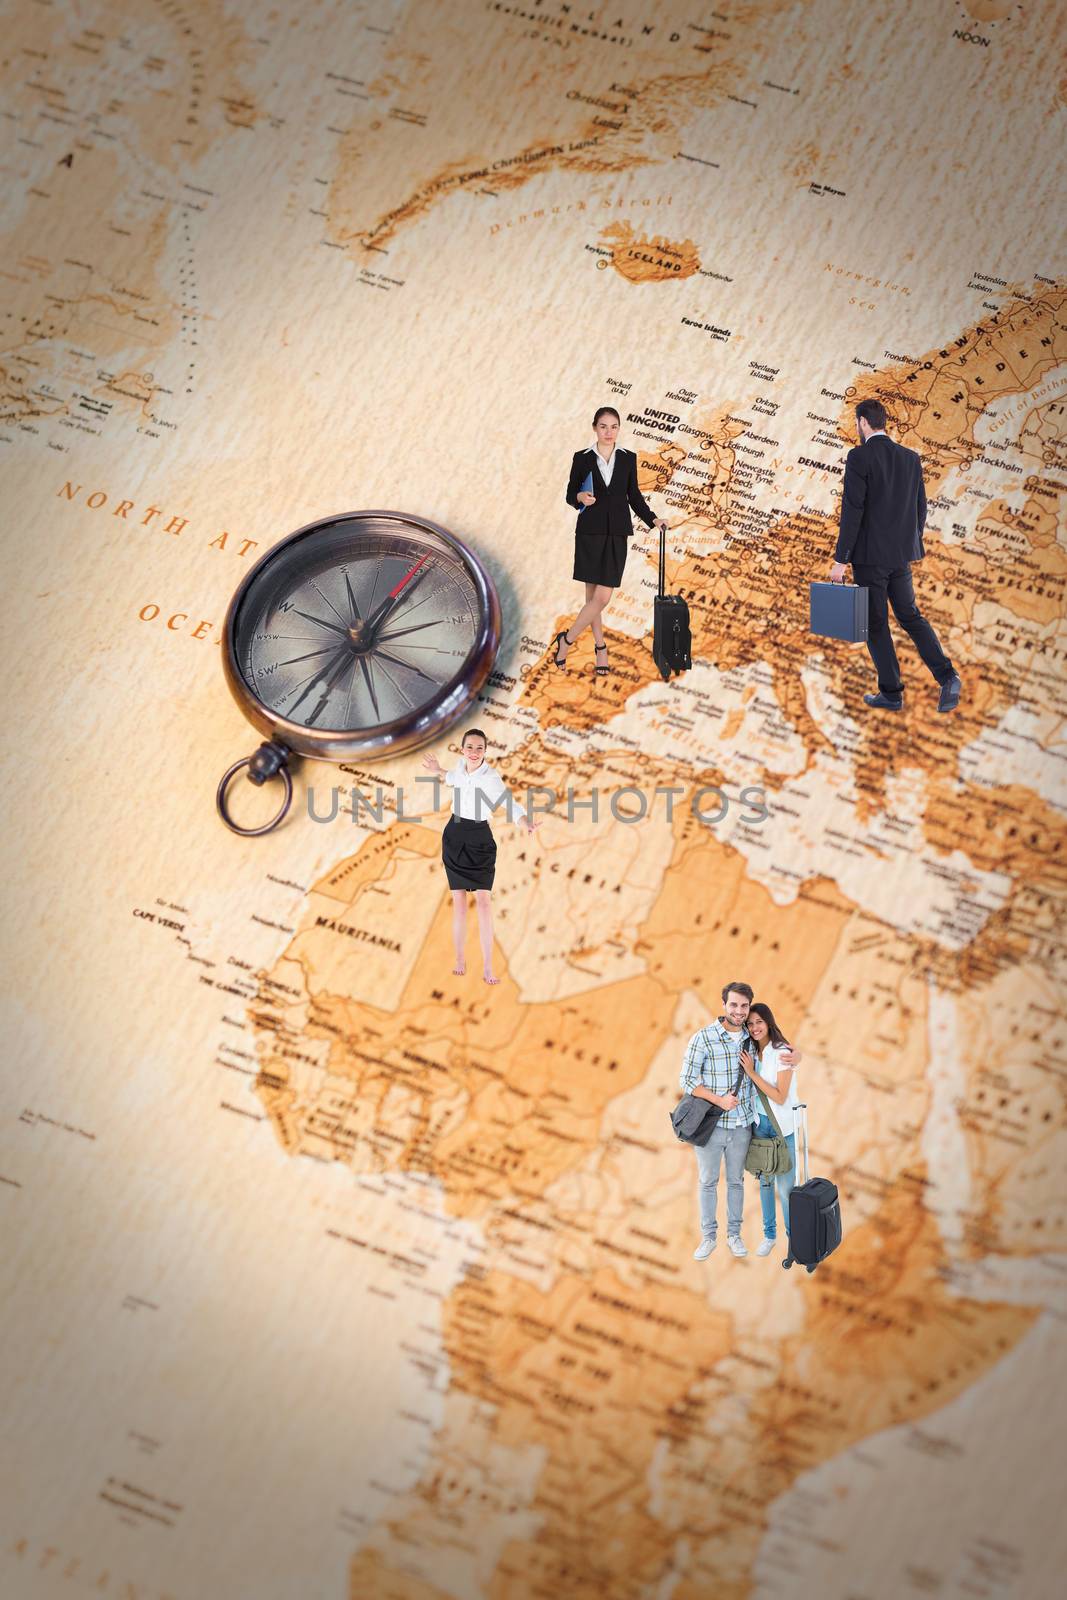 Businessman walking while holding briefcase  against world map with compass showing africa and europe